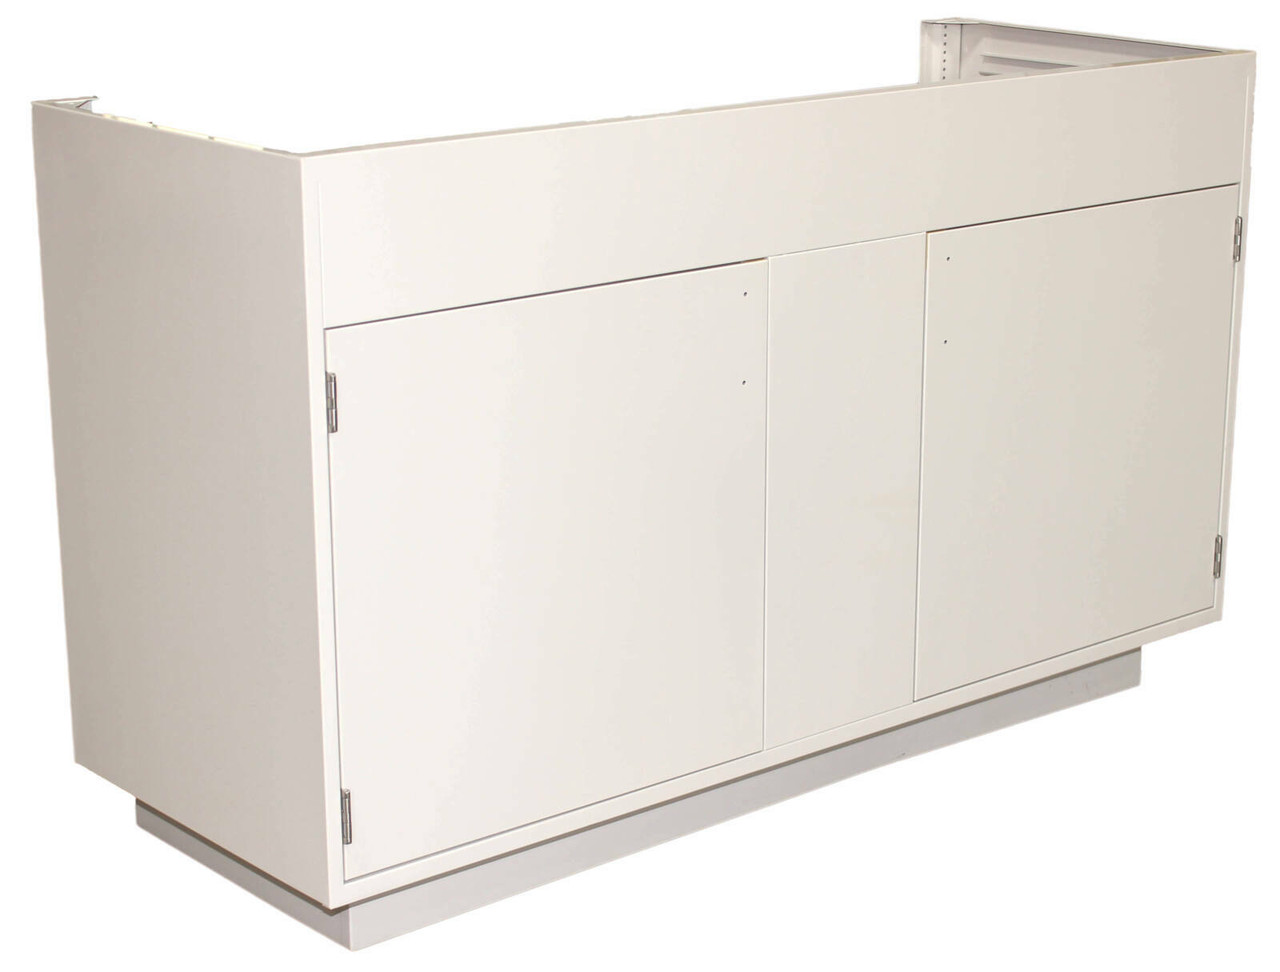 ICI Quick Ship CPJTP186-58 Standing Height Sink Cabinet 2 Door, 58 Inches Wide x 35-1/4 Inches Tall x 21-5/8 Inches Deep, ICI Number: 118S9320.